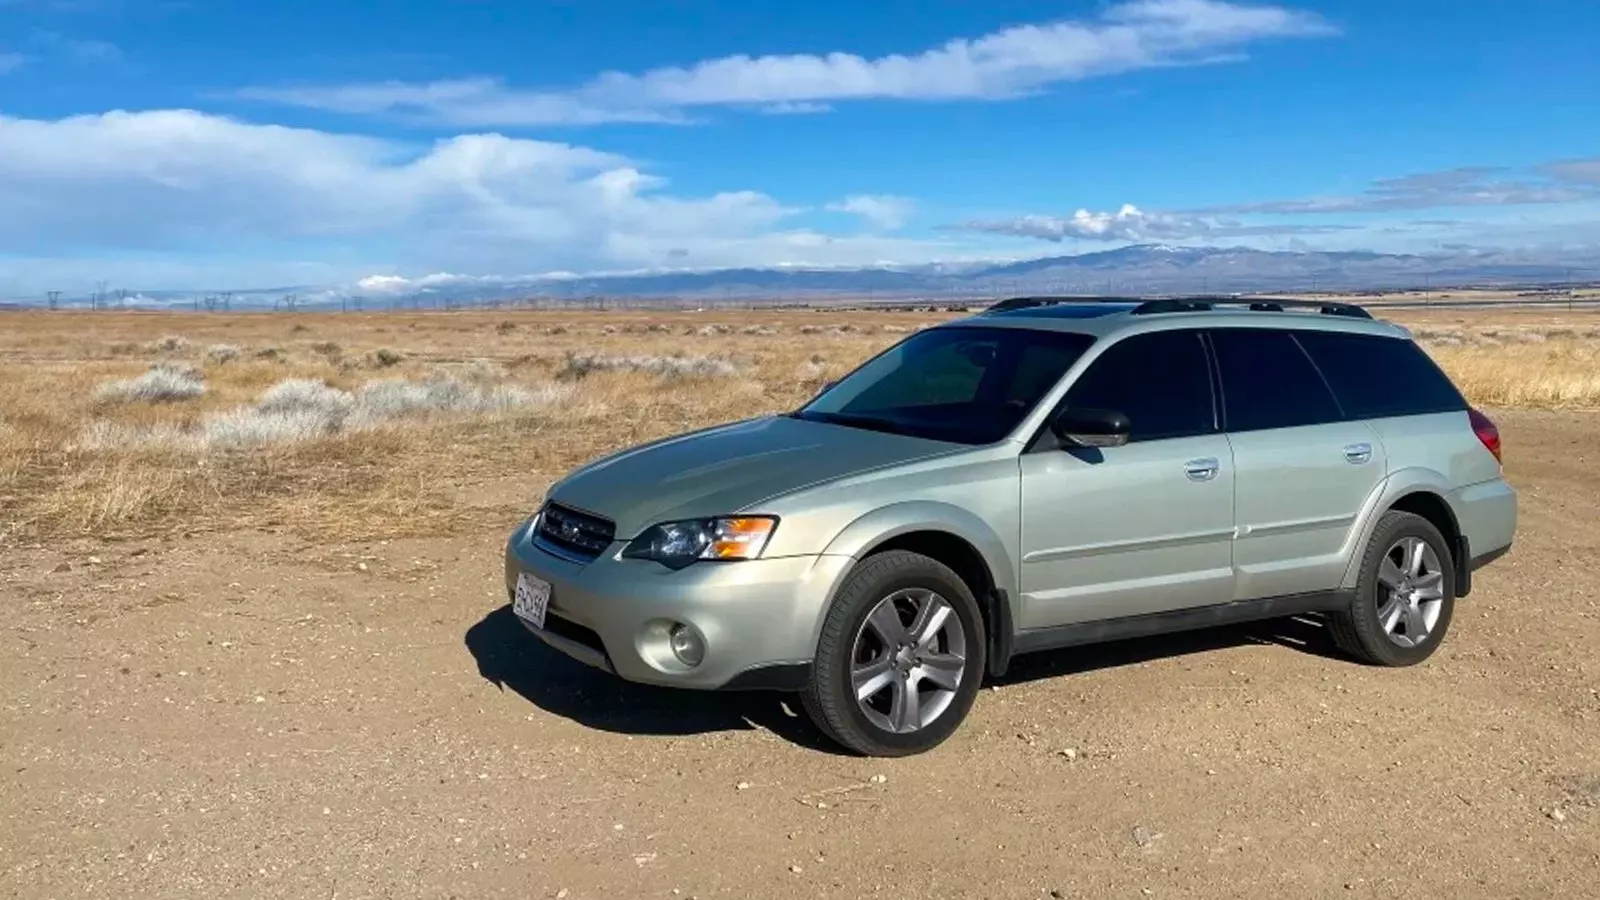 I Wanted a Truck and a Flat-Six Engine so I Got an Old Subaru Outback